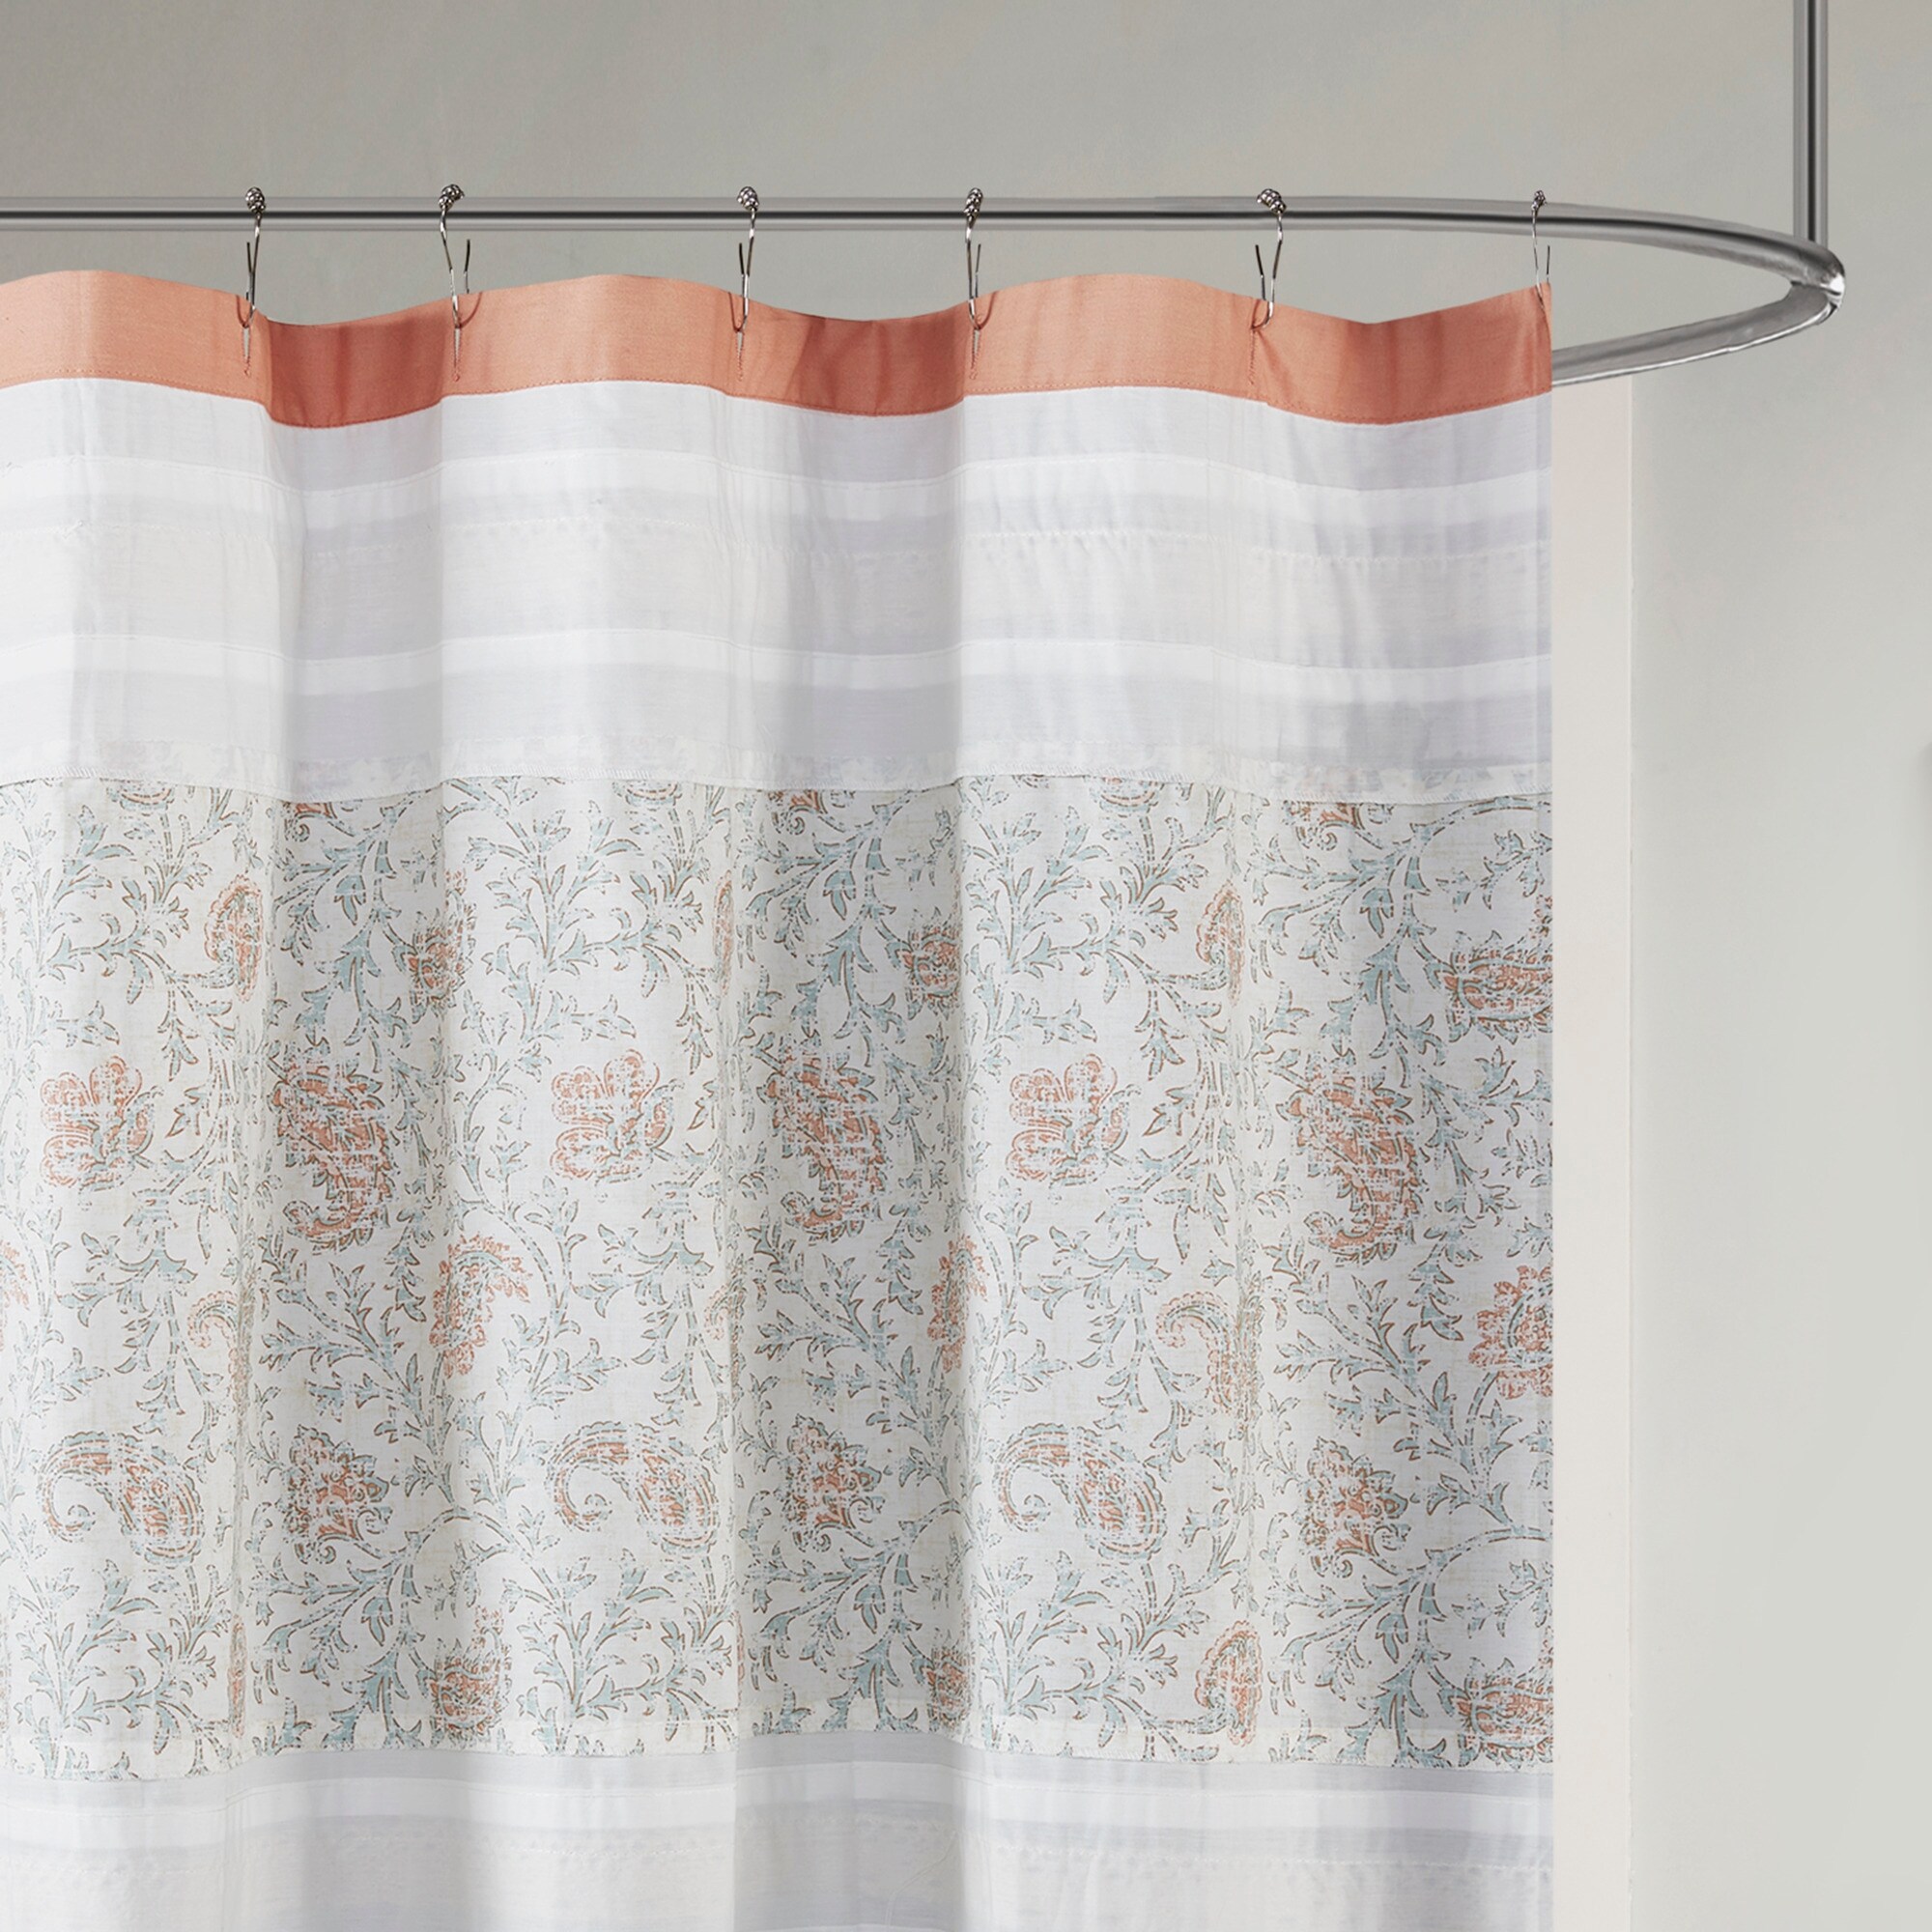 https://ak1.ostkcdn.com/images/products/is/images/direct/4b79aa1d6582e1b80ffd1d62fcd4ff0972b44e61/Copper-Grove-Aleza-Cotton-Shower-Curtain.jpg